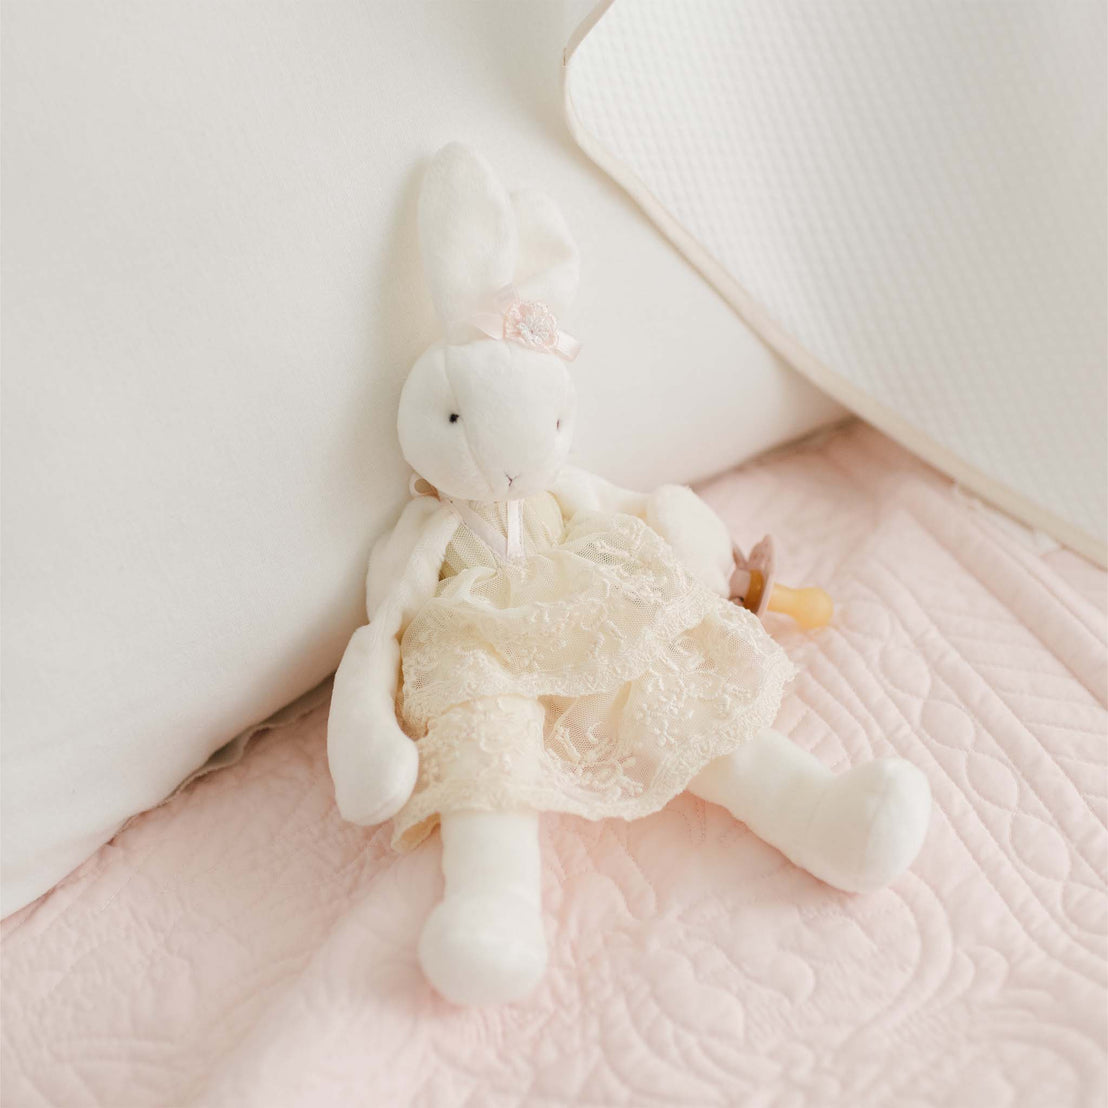 A Jessica Silly Bunny Buddy | Pacifier Holder, with a pink flower on its head and a cream lace dress, sits propped against white pillows on a pale pink quilted blanket.